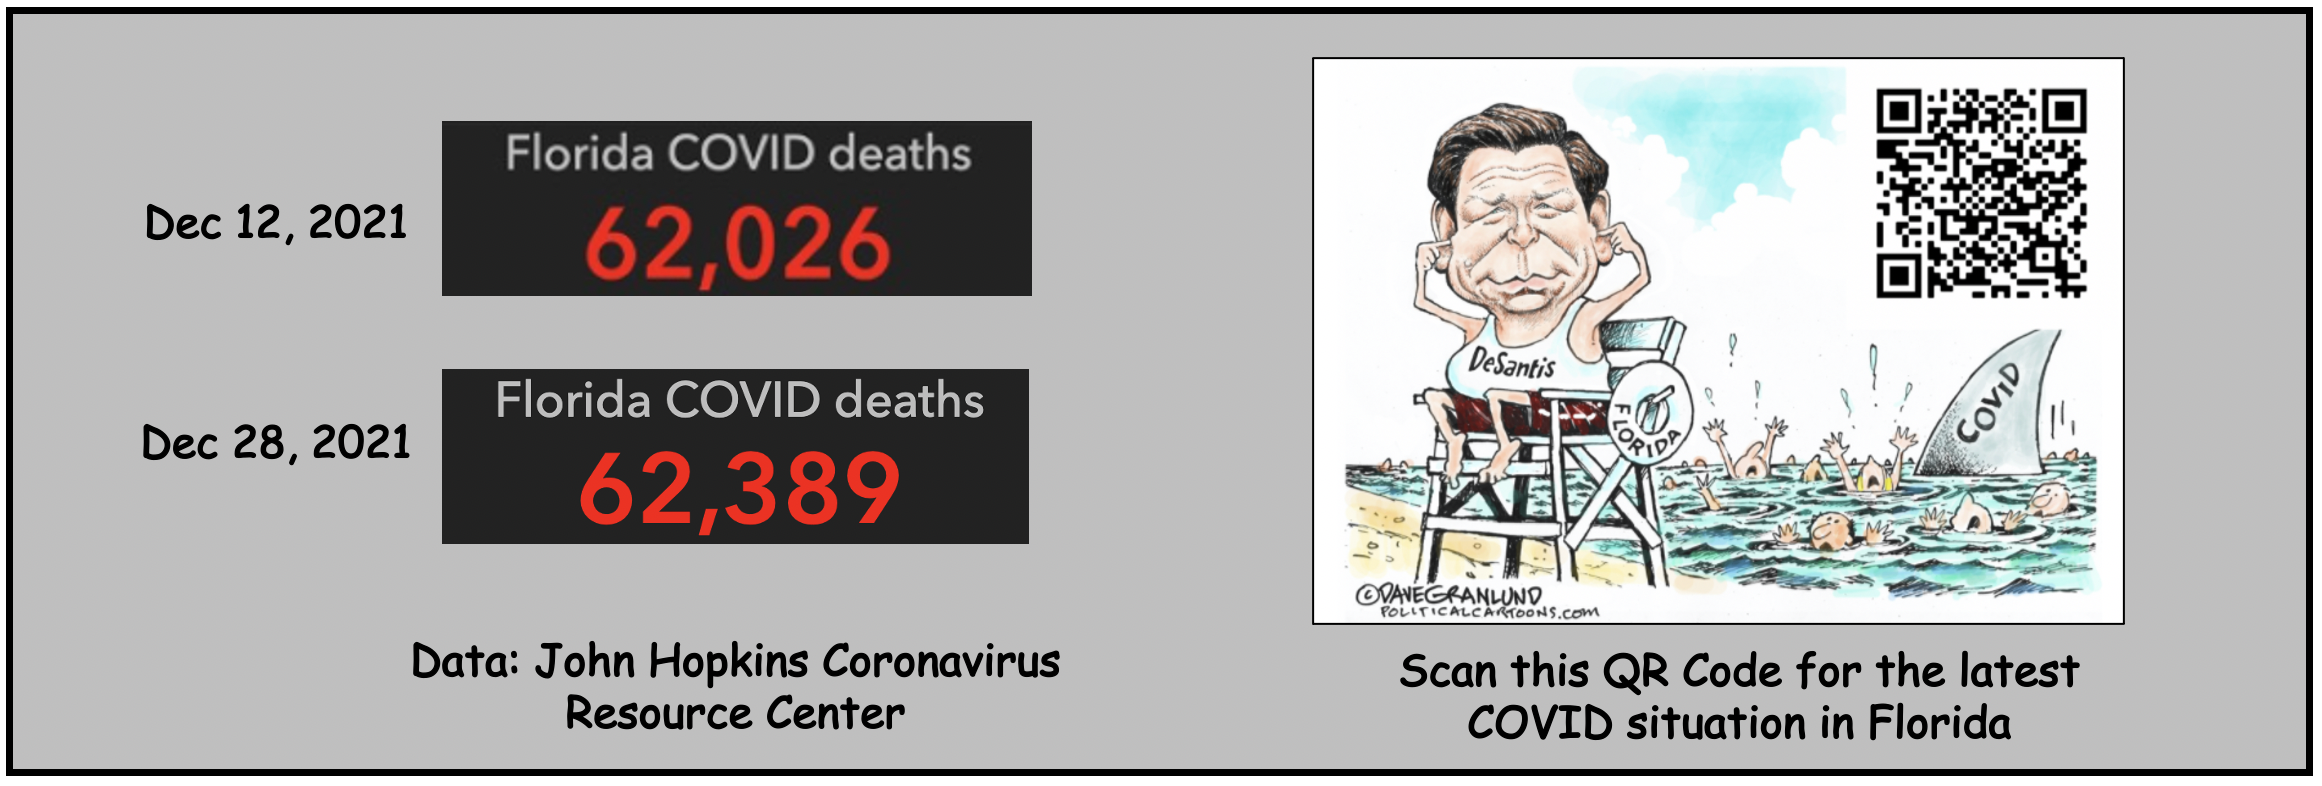 COVID situation in Florida worsens as DeSantis ignores medical experts